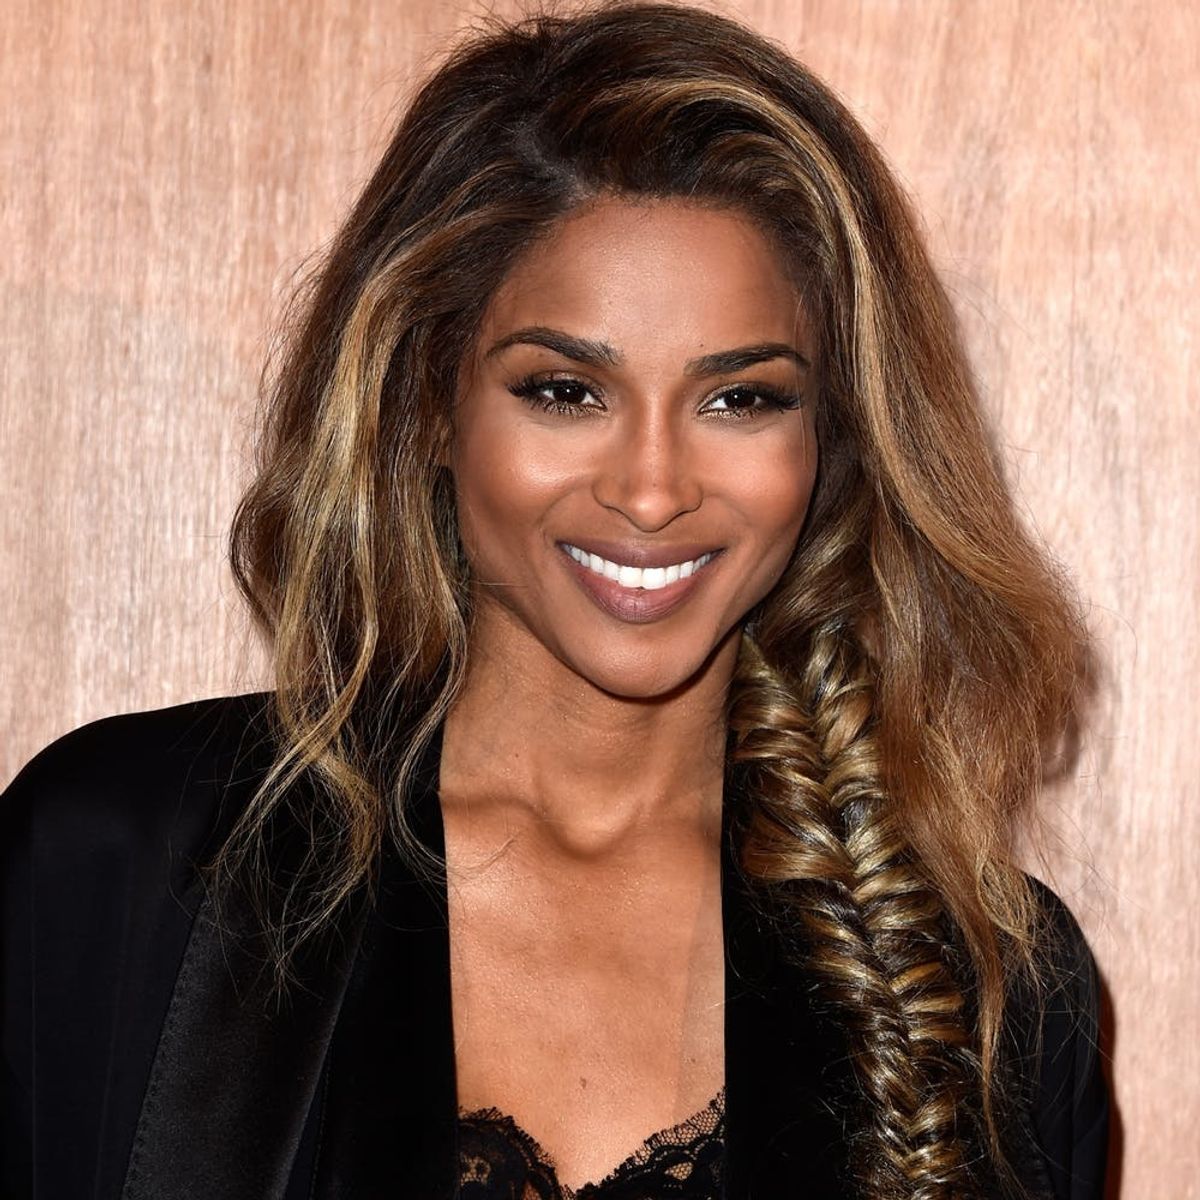 Ciara’s Engagement Ring Is About to Make Your Jaw Drop 